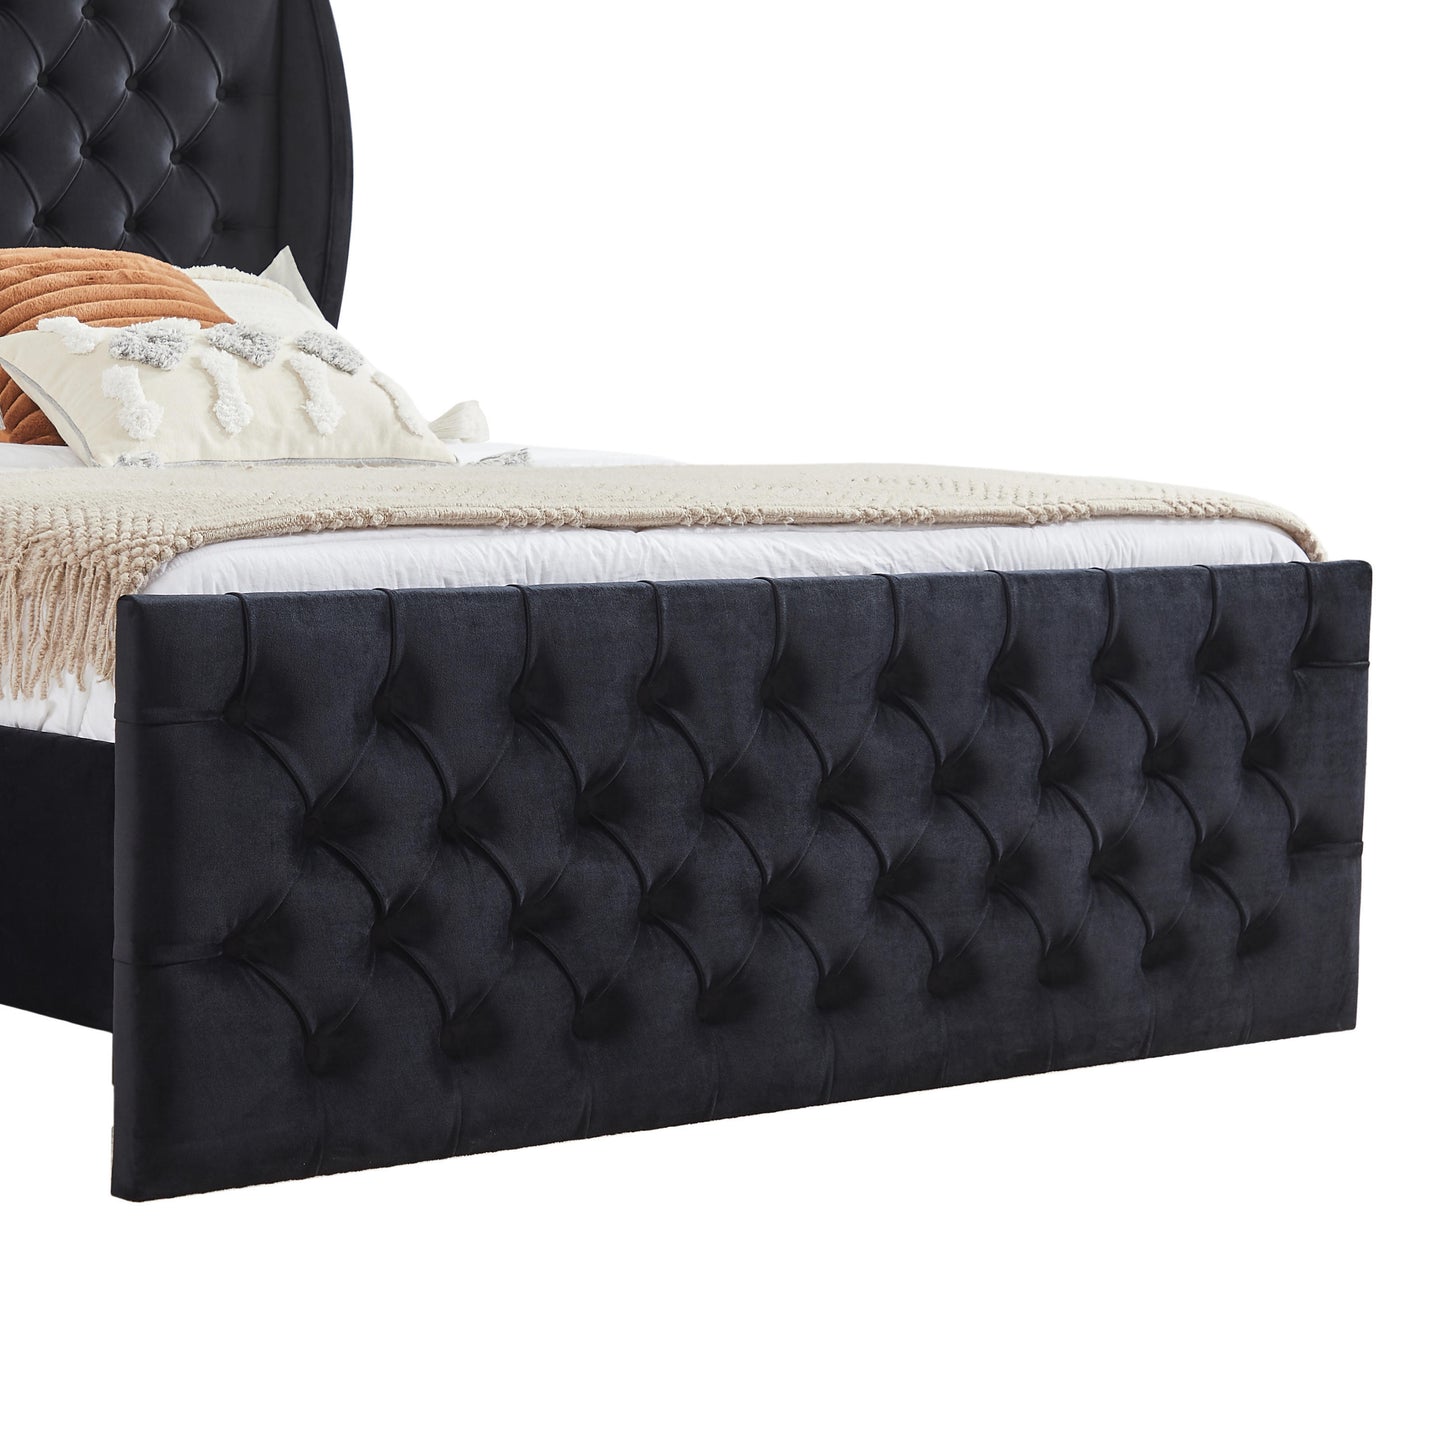 Rodeo King Bed (black)